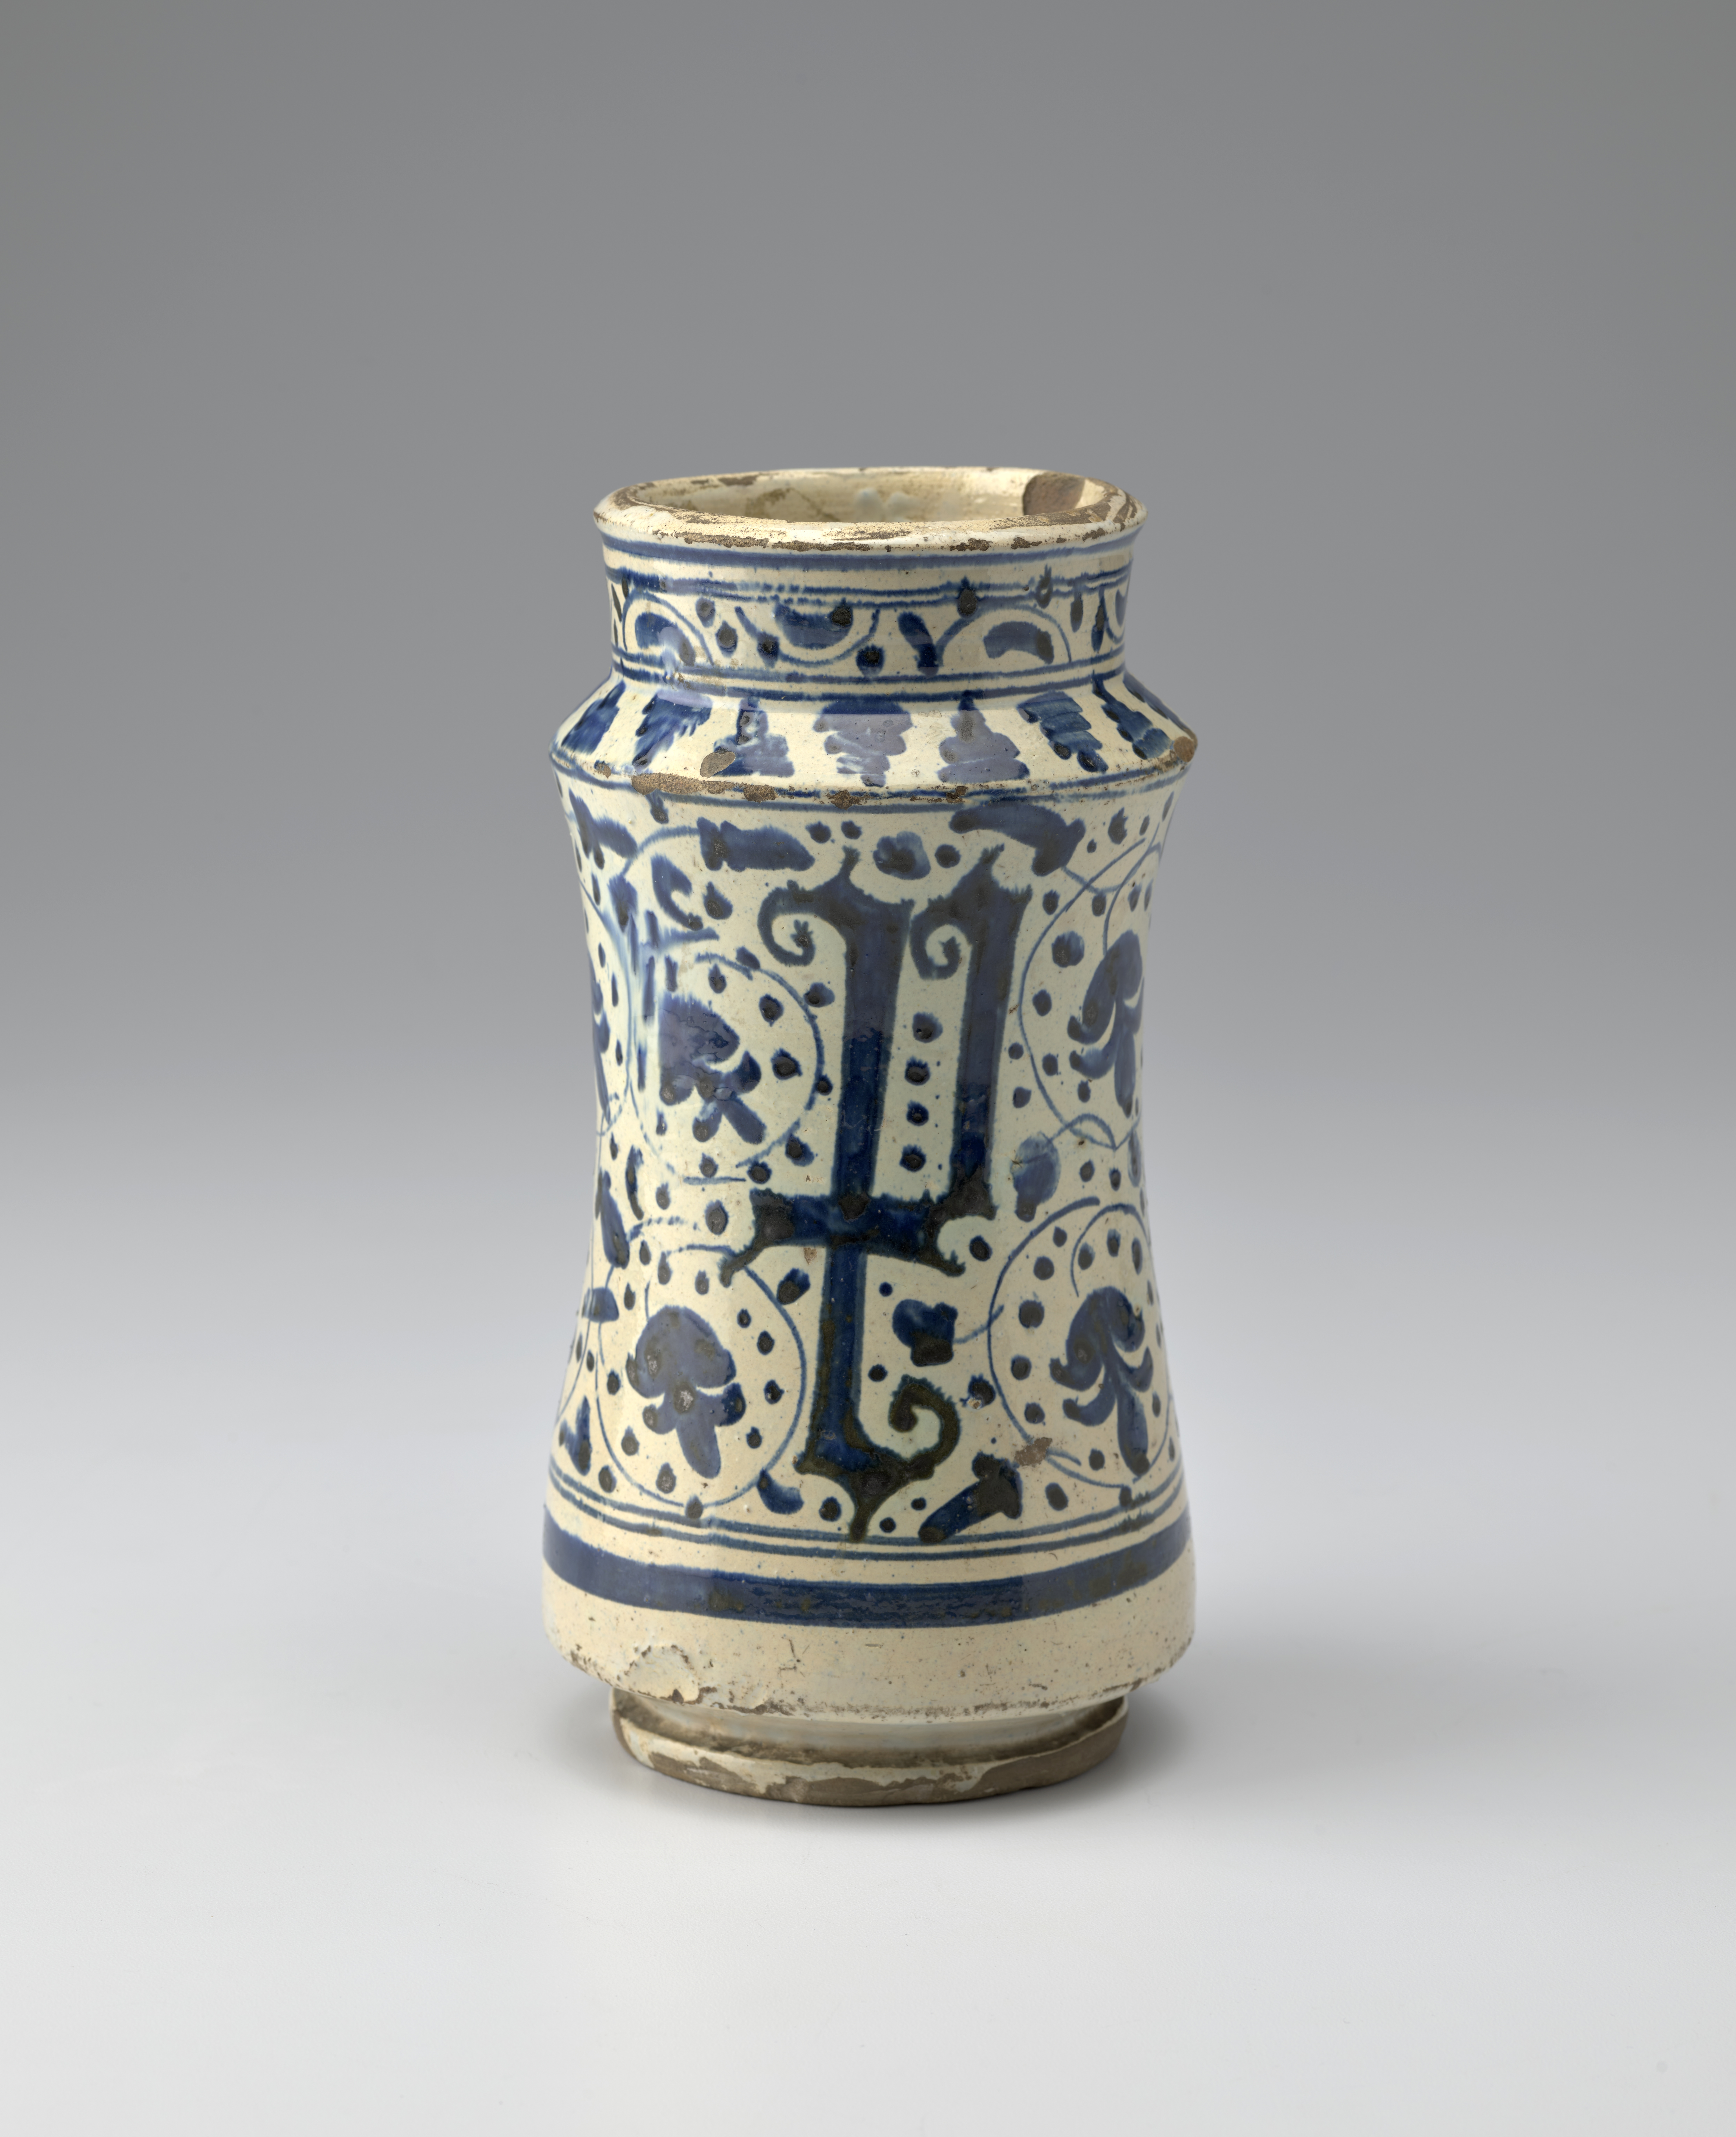 A blue and white pottery jar decorated with Gothic letter forms and floral patterns.